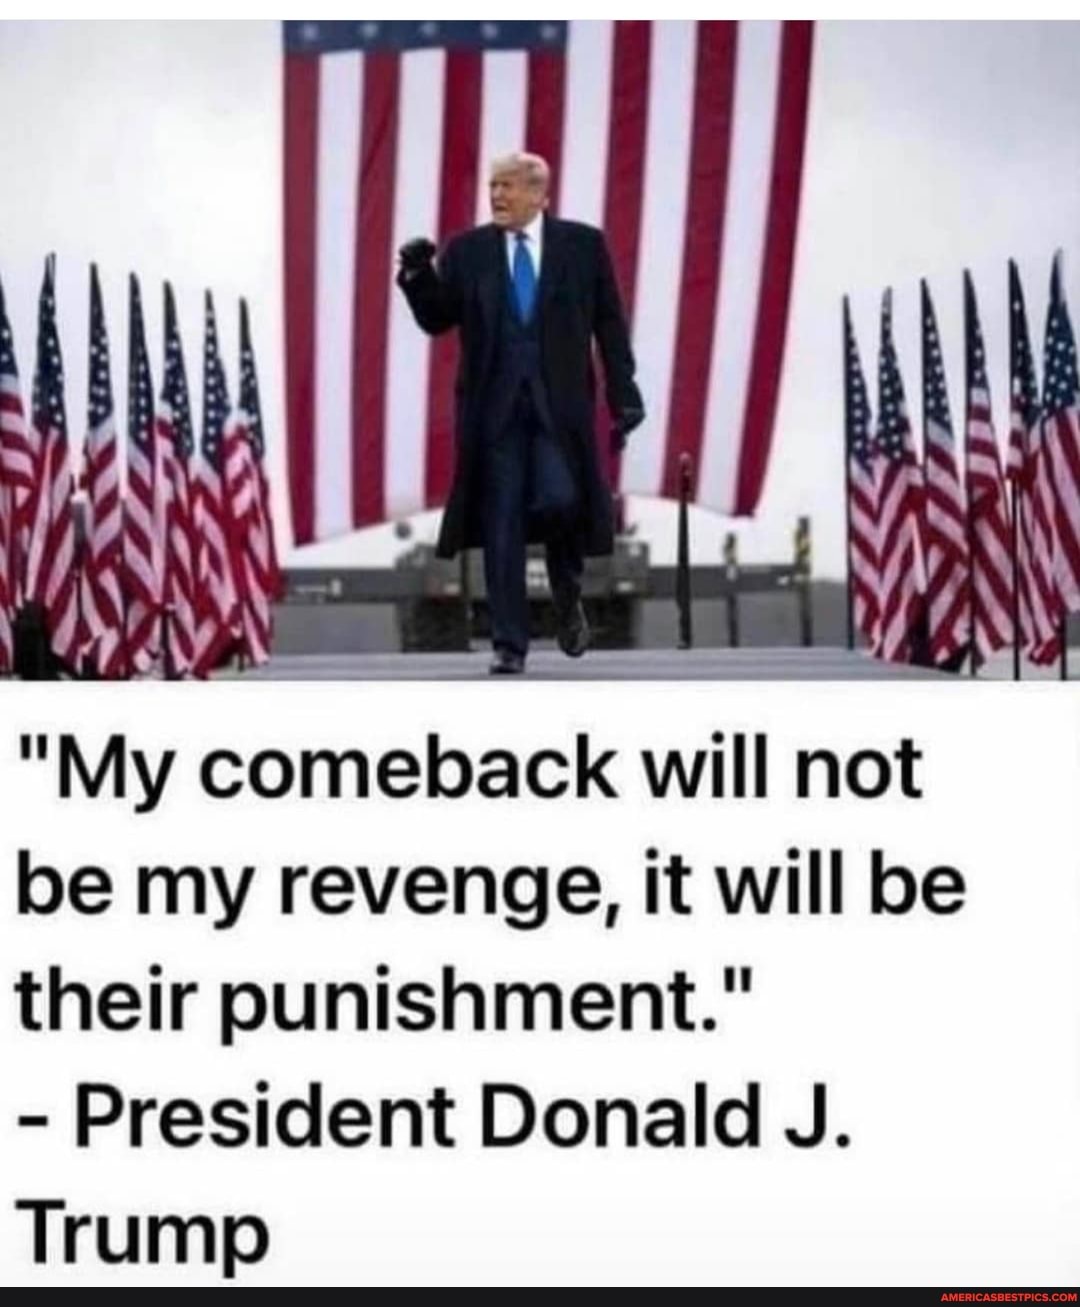 An\ "My comeback will not be my revenge, it will be their punishment." -  President Donald J. Trump - America's best pics and videos